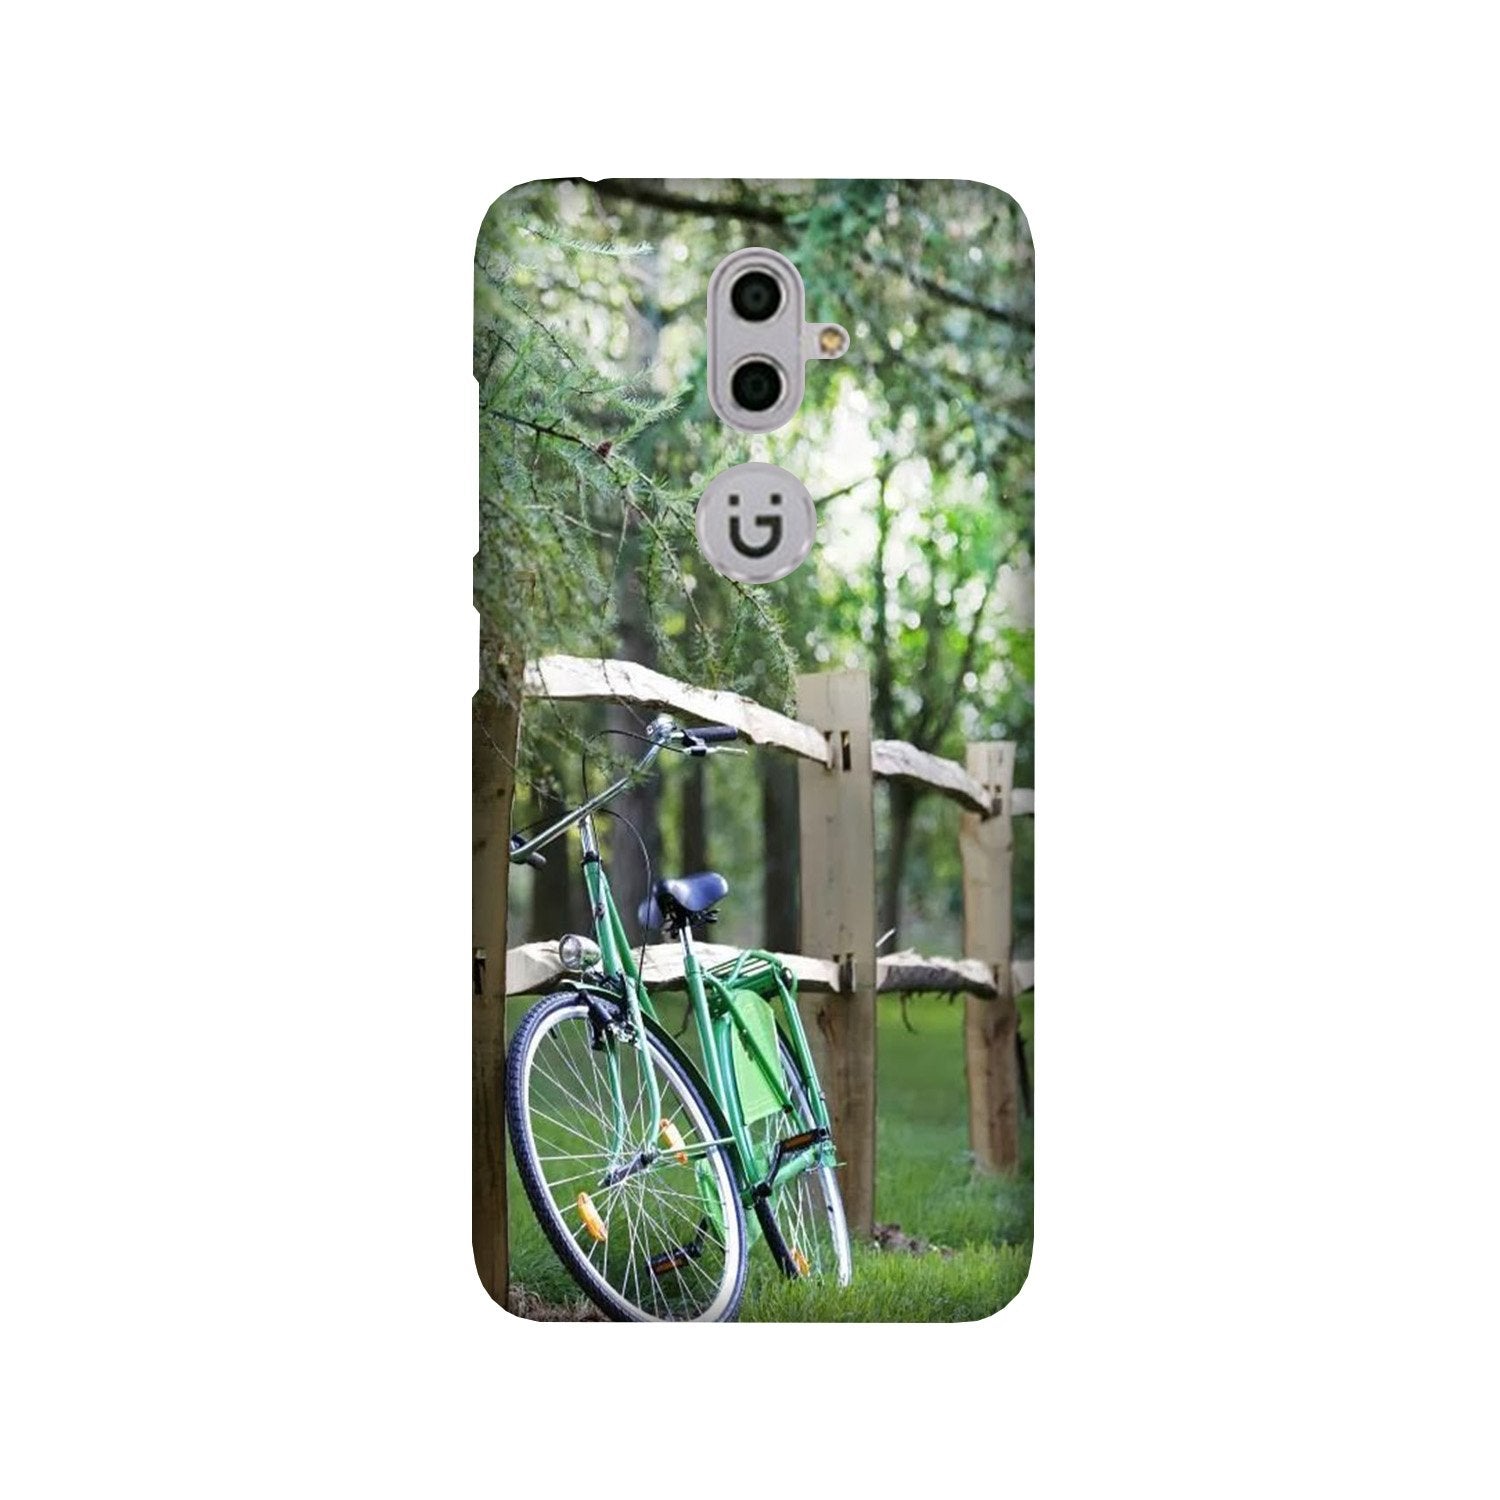 Bicycle Case for Gionee S9 (Design No. 208)